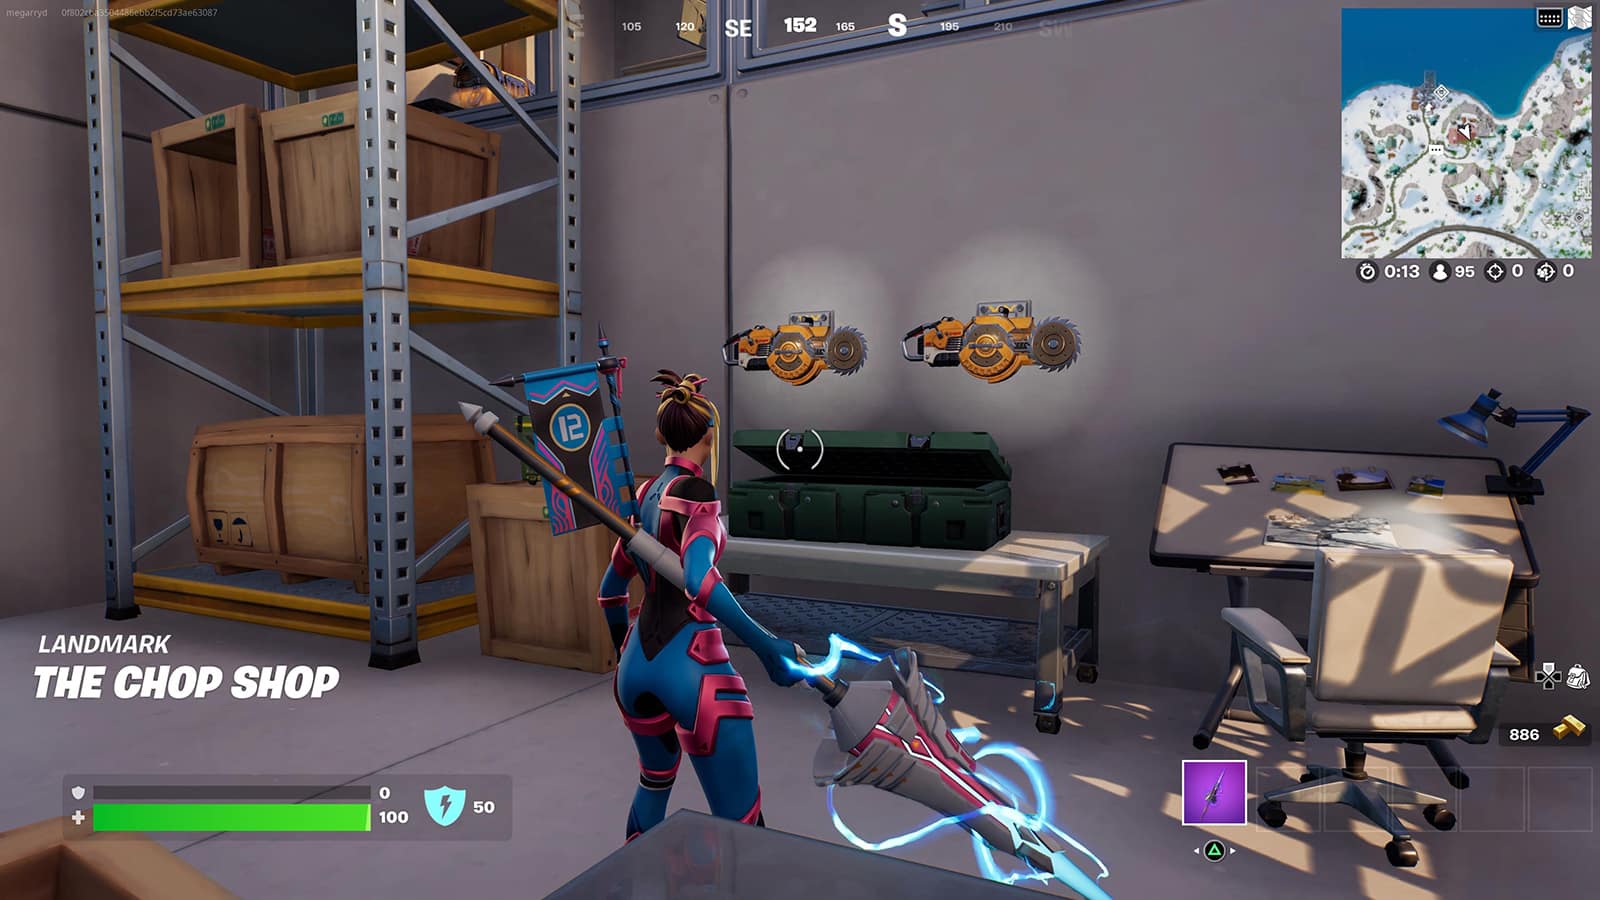 A Ripsaw Launcher in Fortnite